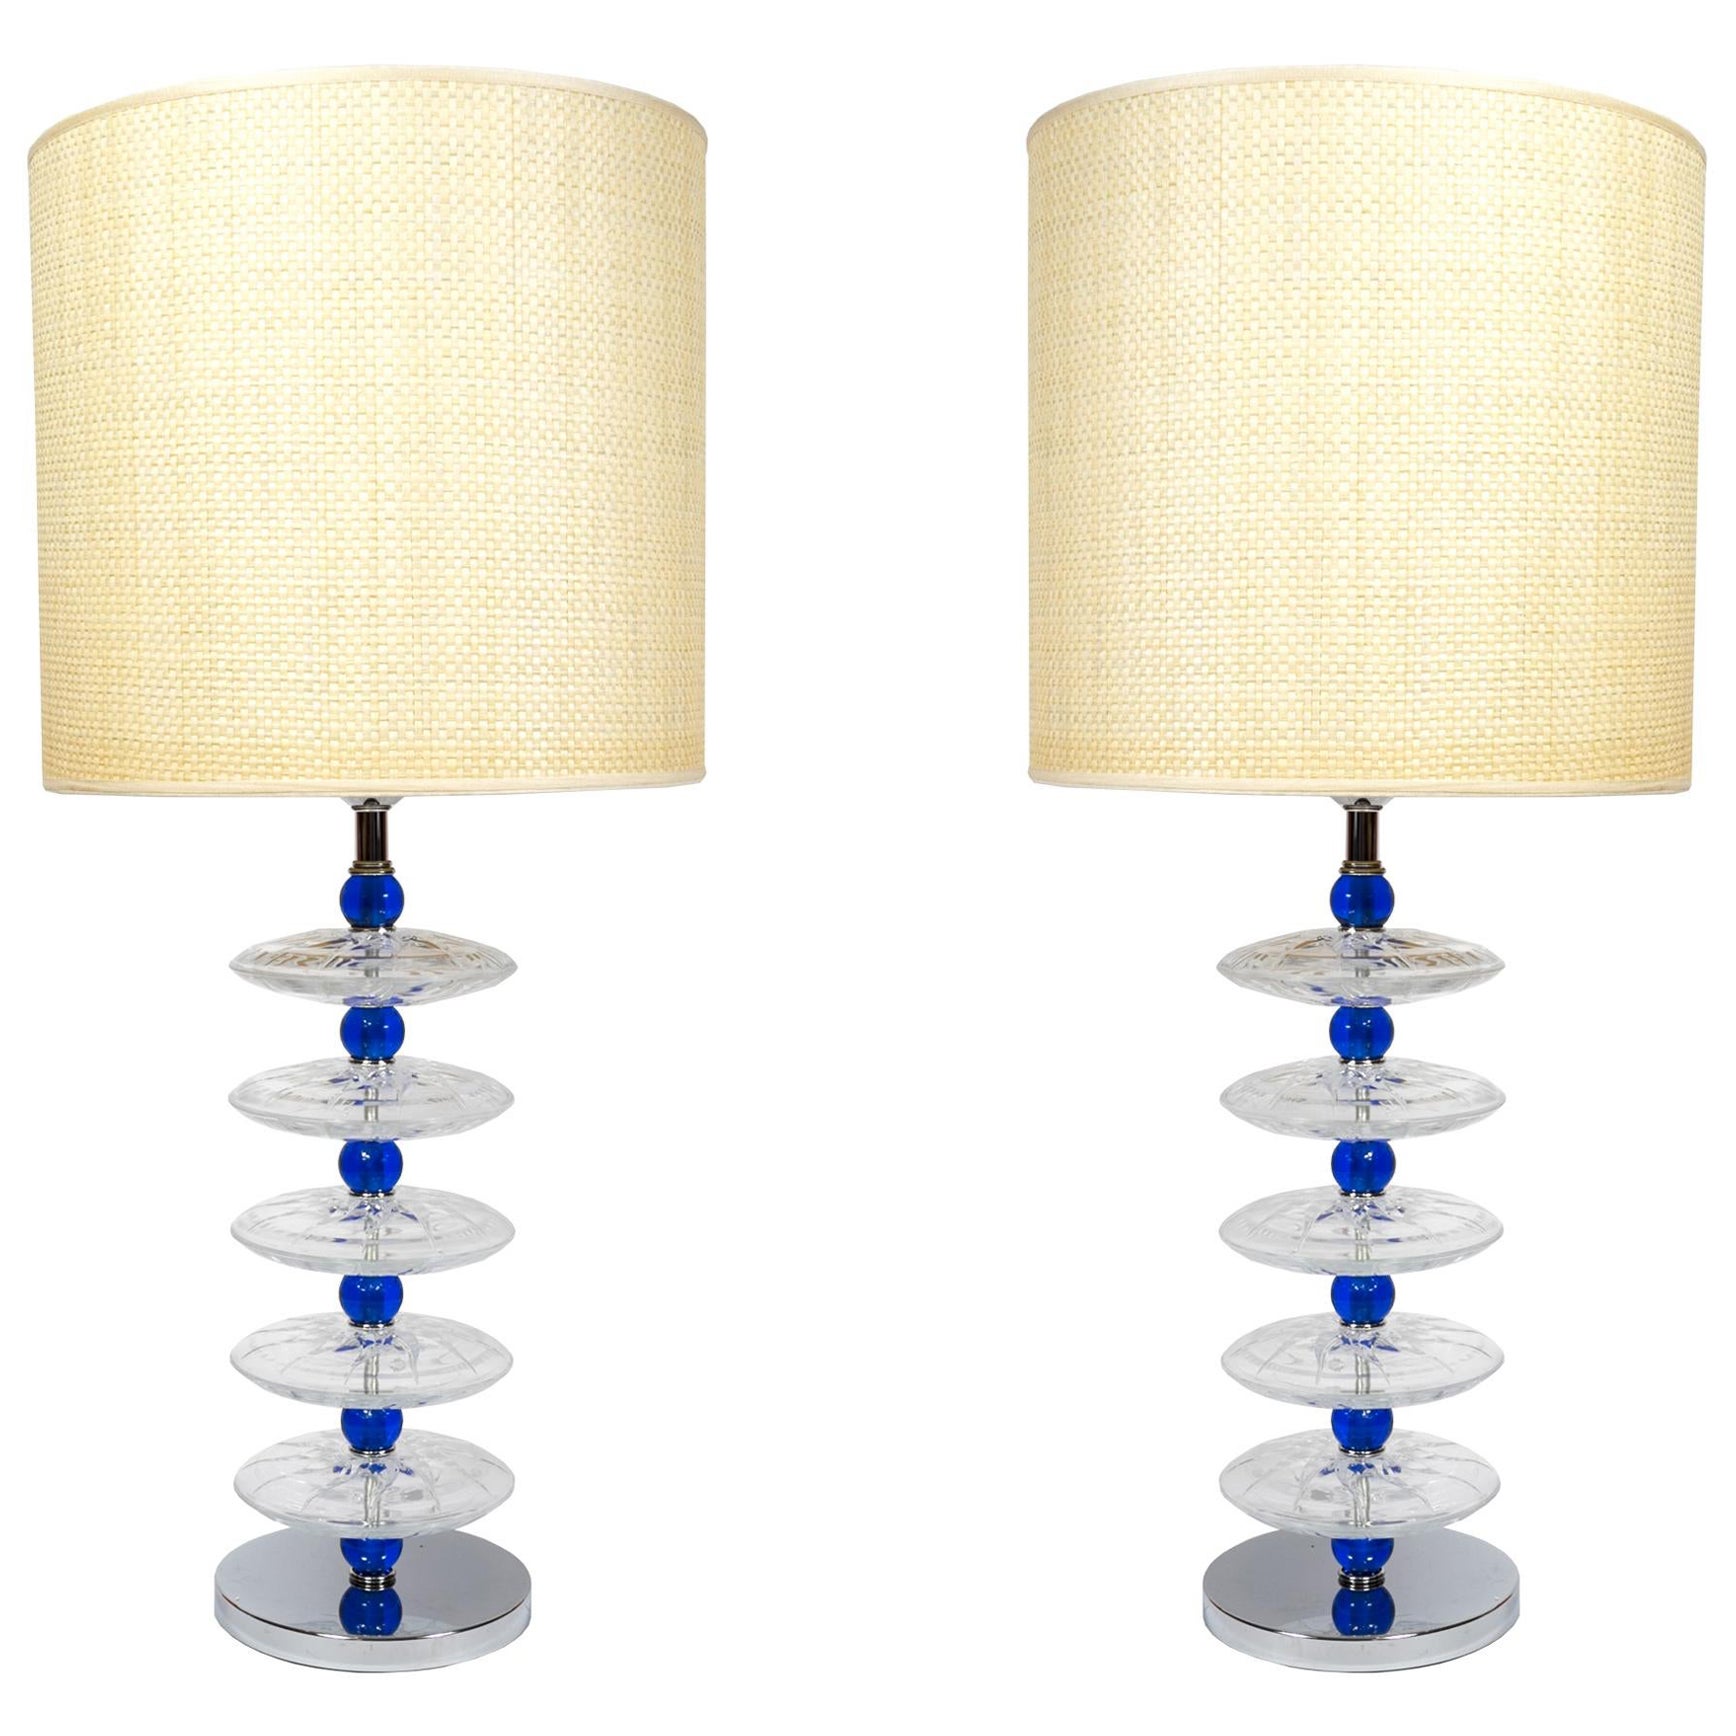 Pair of Murano glass lamps in the style of Seguso